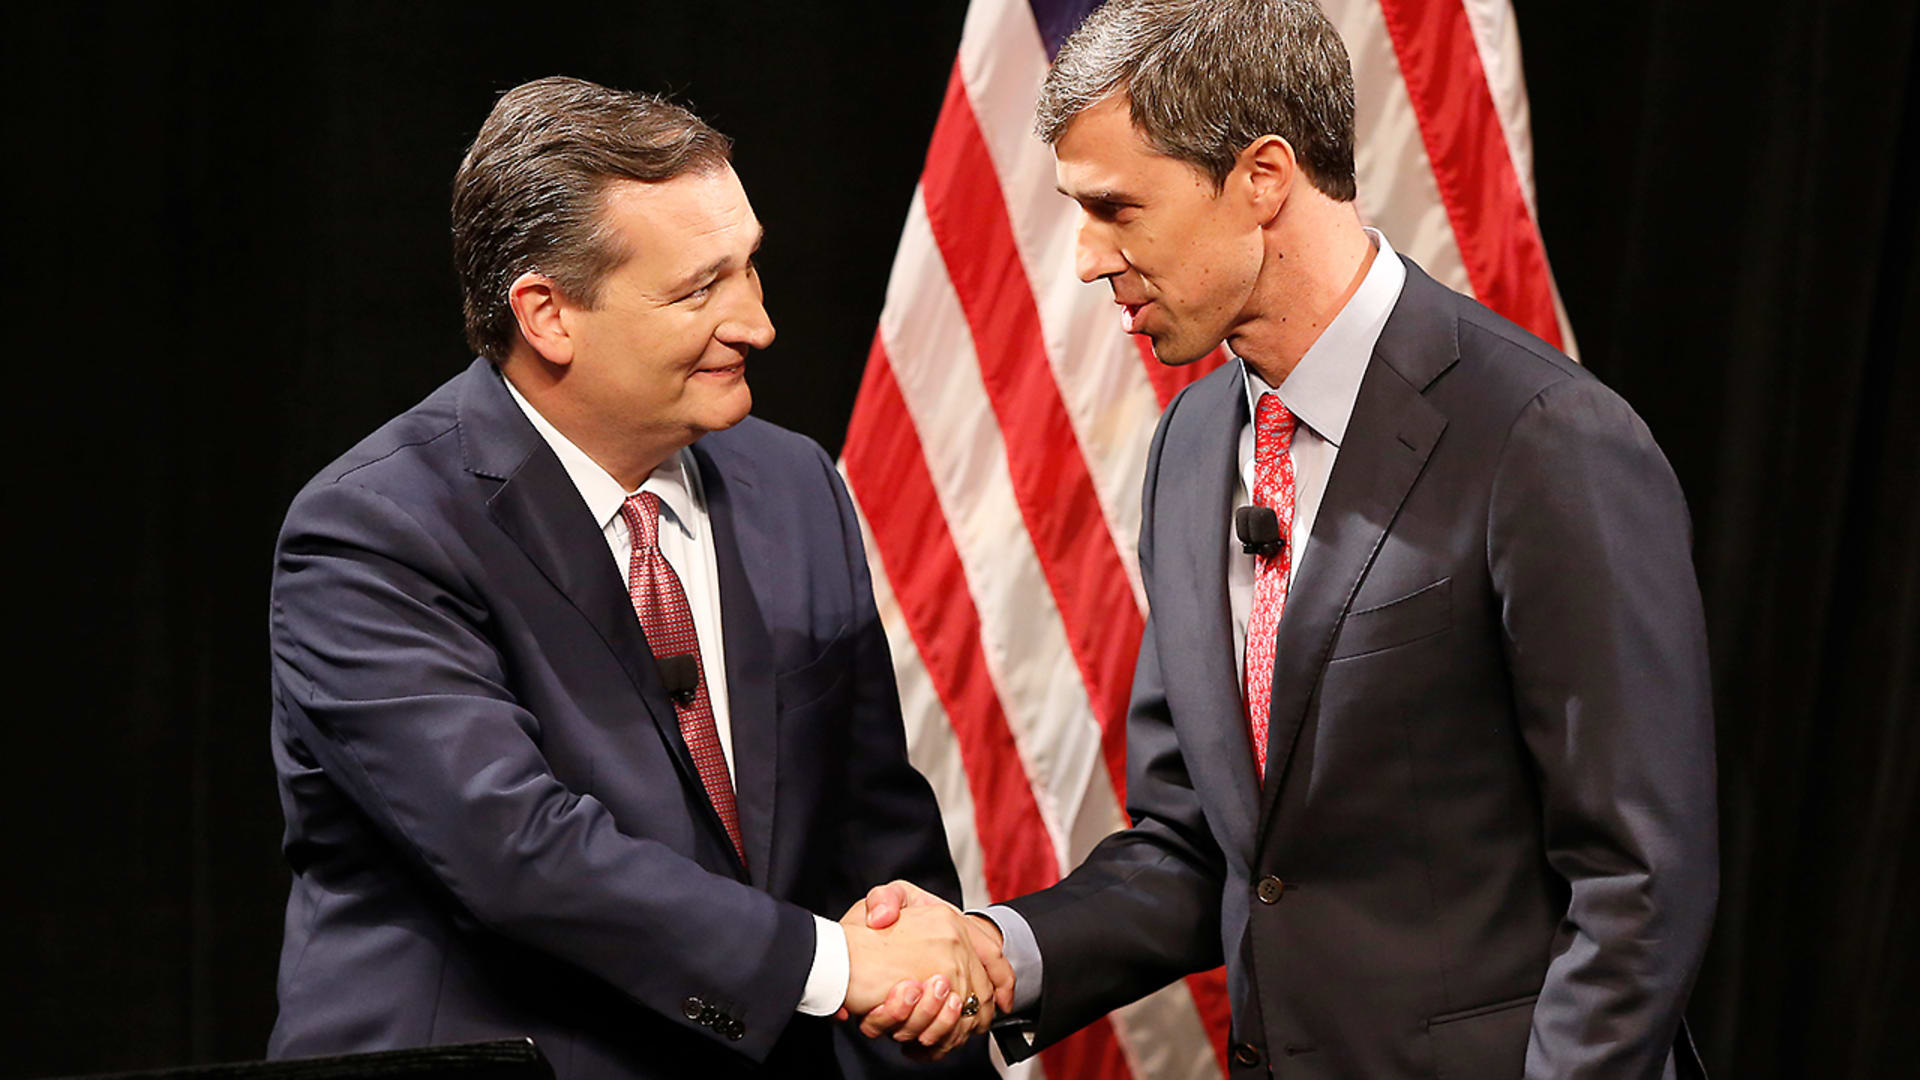 How Ted Cruz plans to beat Beto O’Rourke: Play it simple